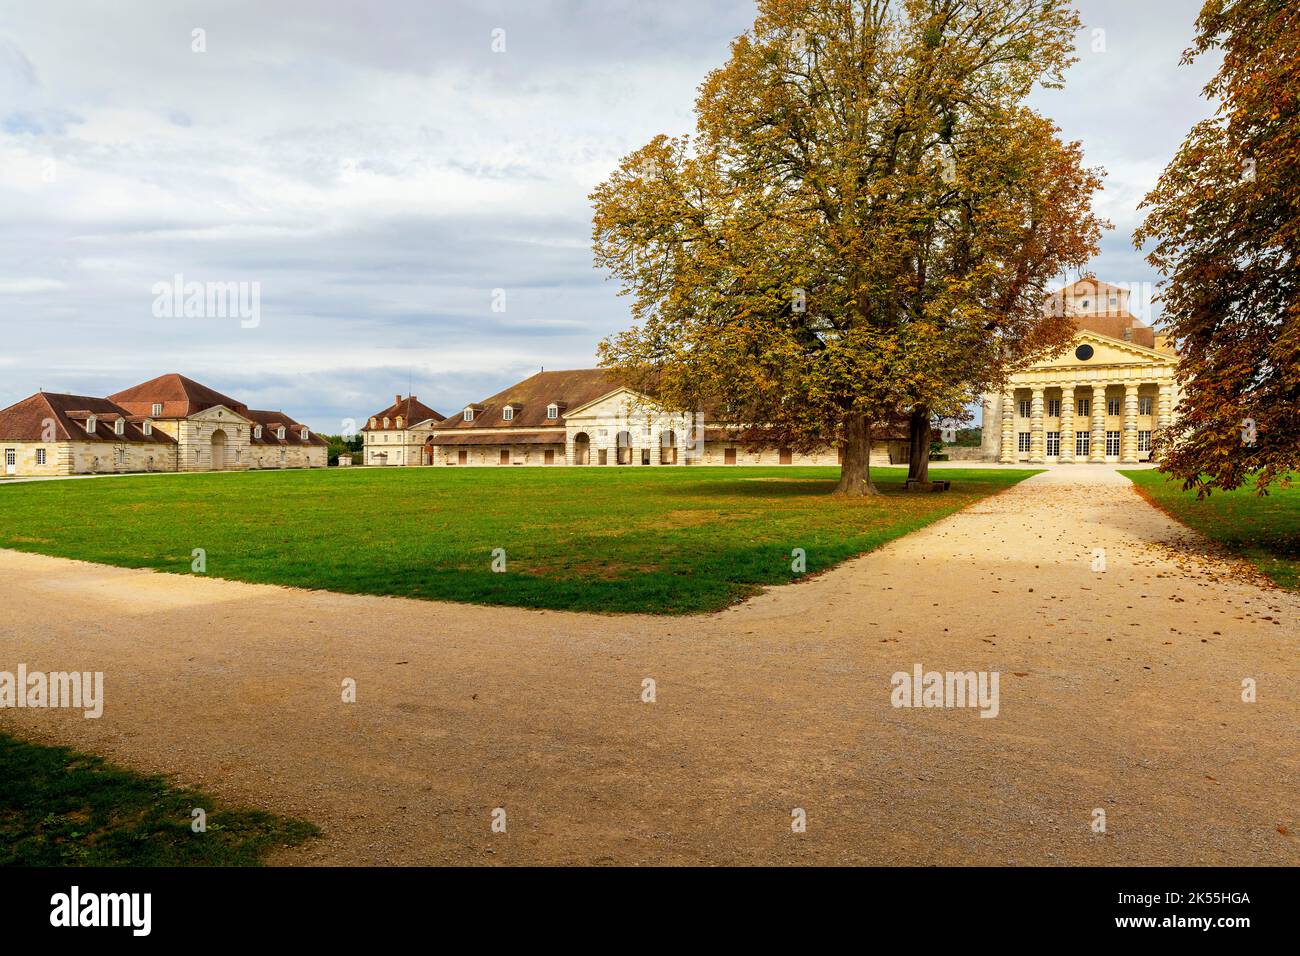 The Saline Royale (Royal Saltworks) is a historical building at Arc-et-Senans in the department of Doubs, Eastern France. Stock Photo